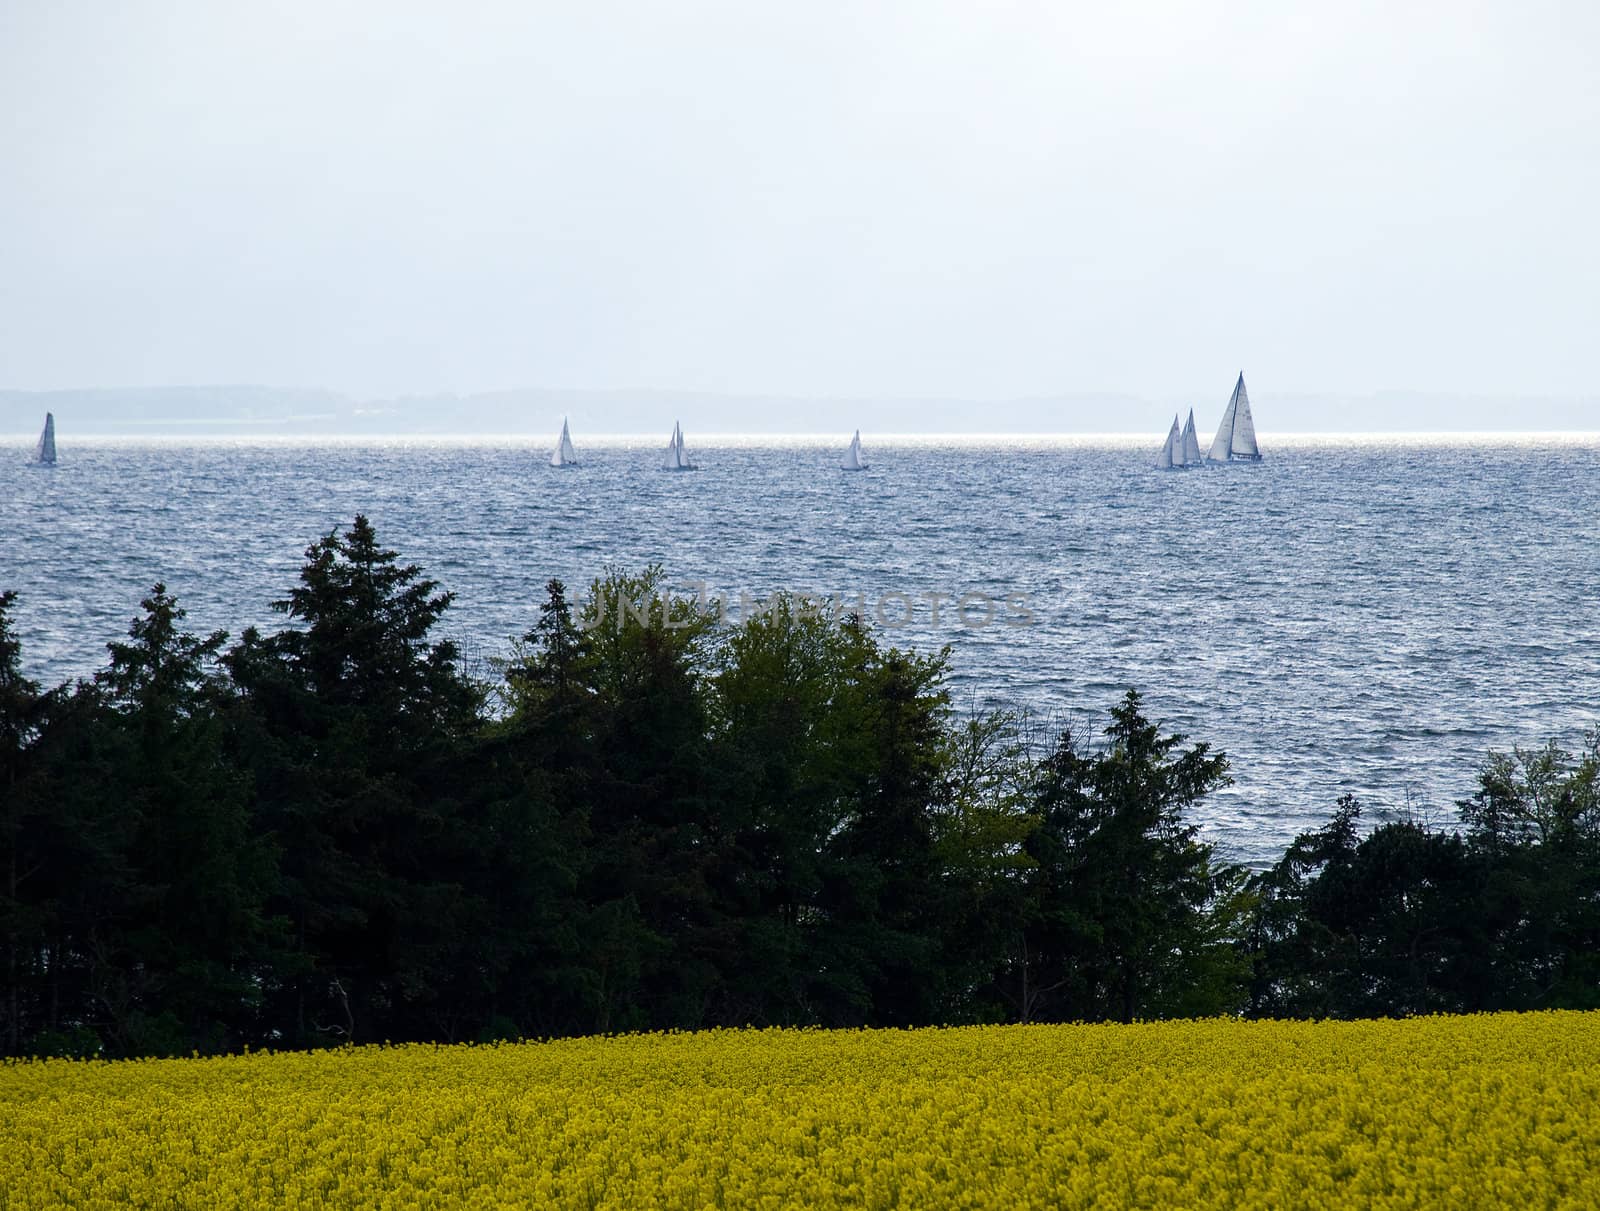 Sailboats yachts in clear blue sea with field in the foreground 